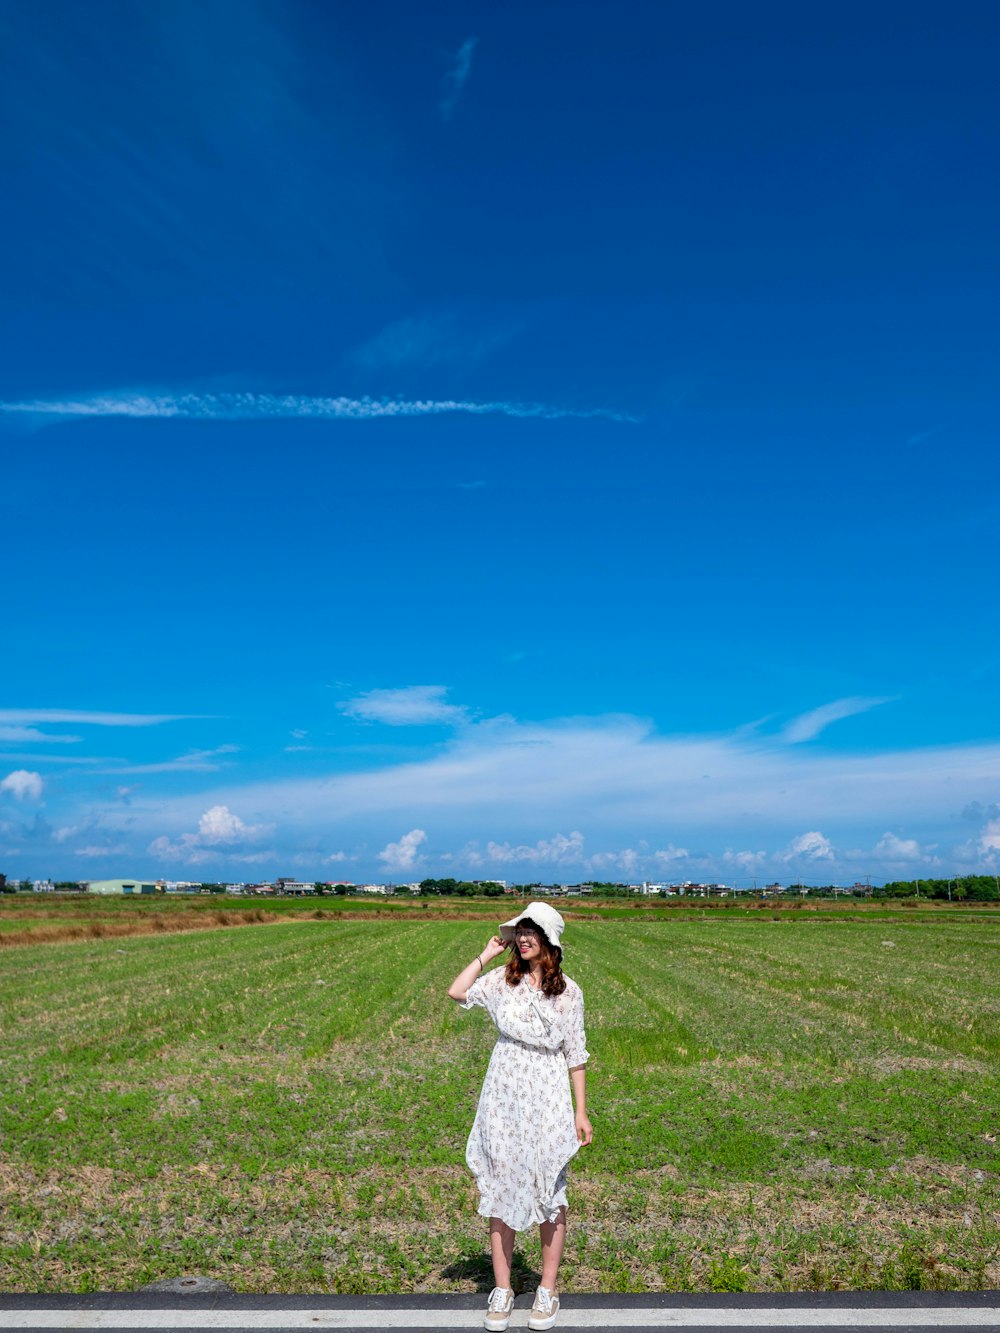 woman in white dress standing on green grass field under blue sky during daytime